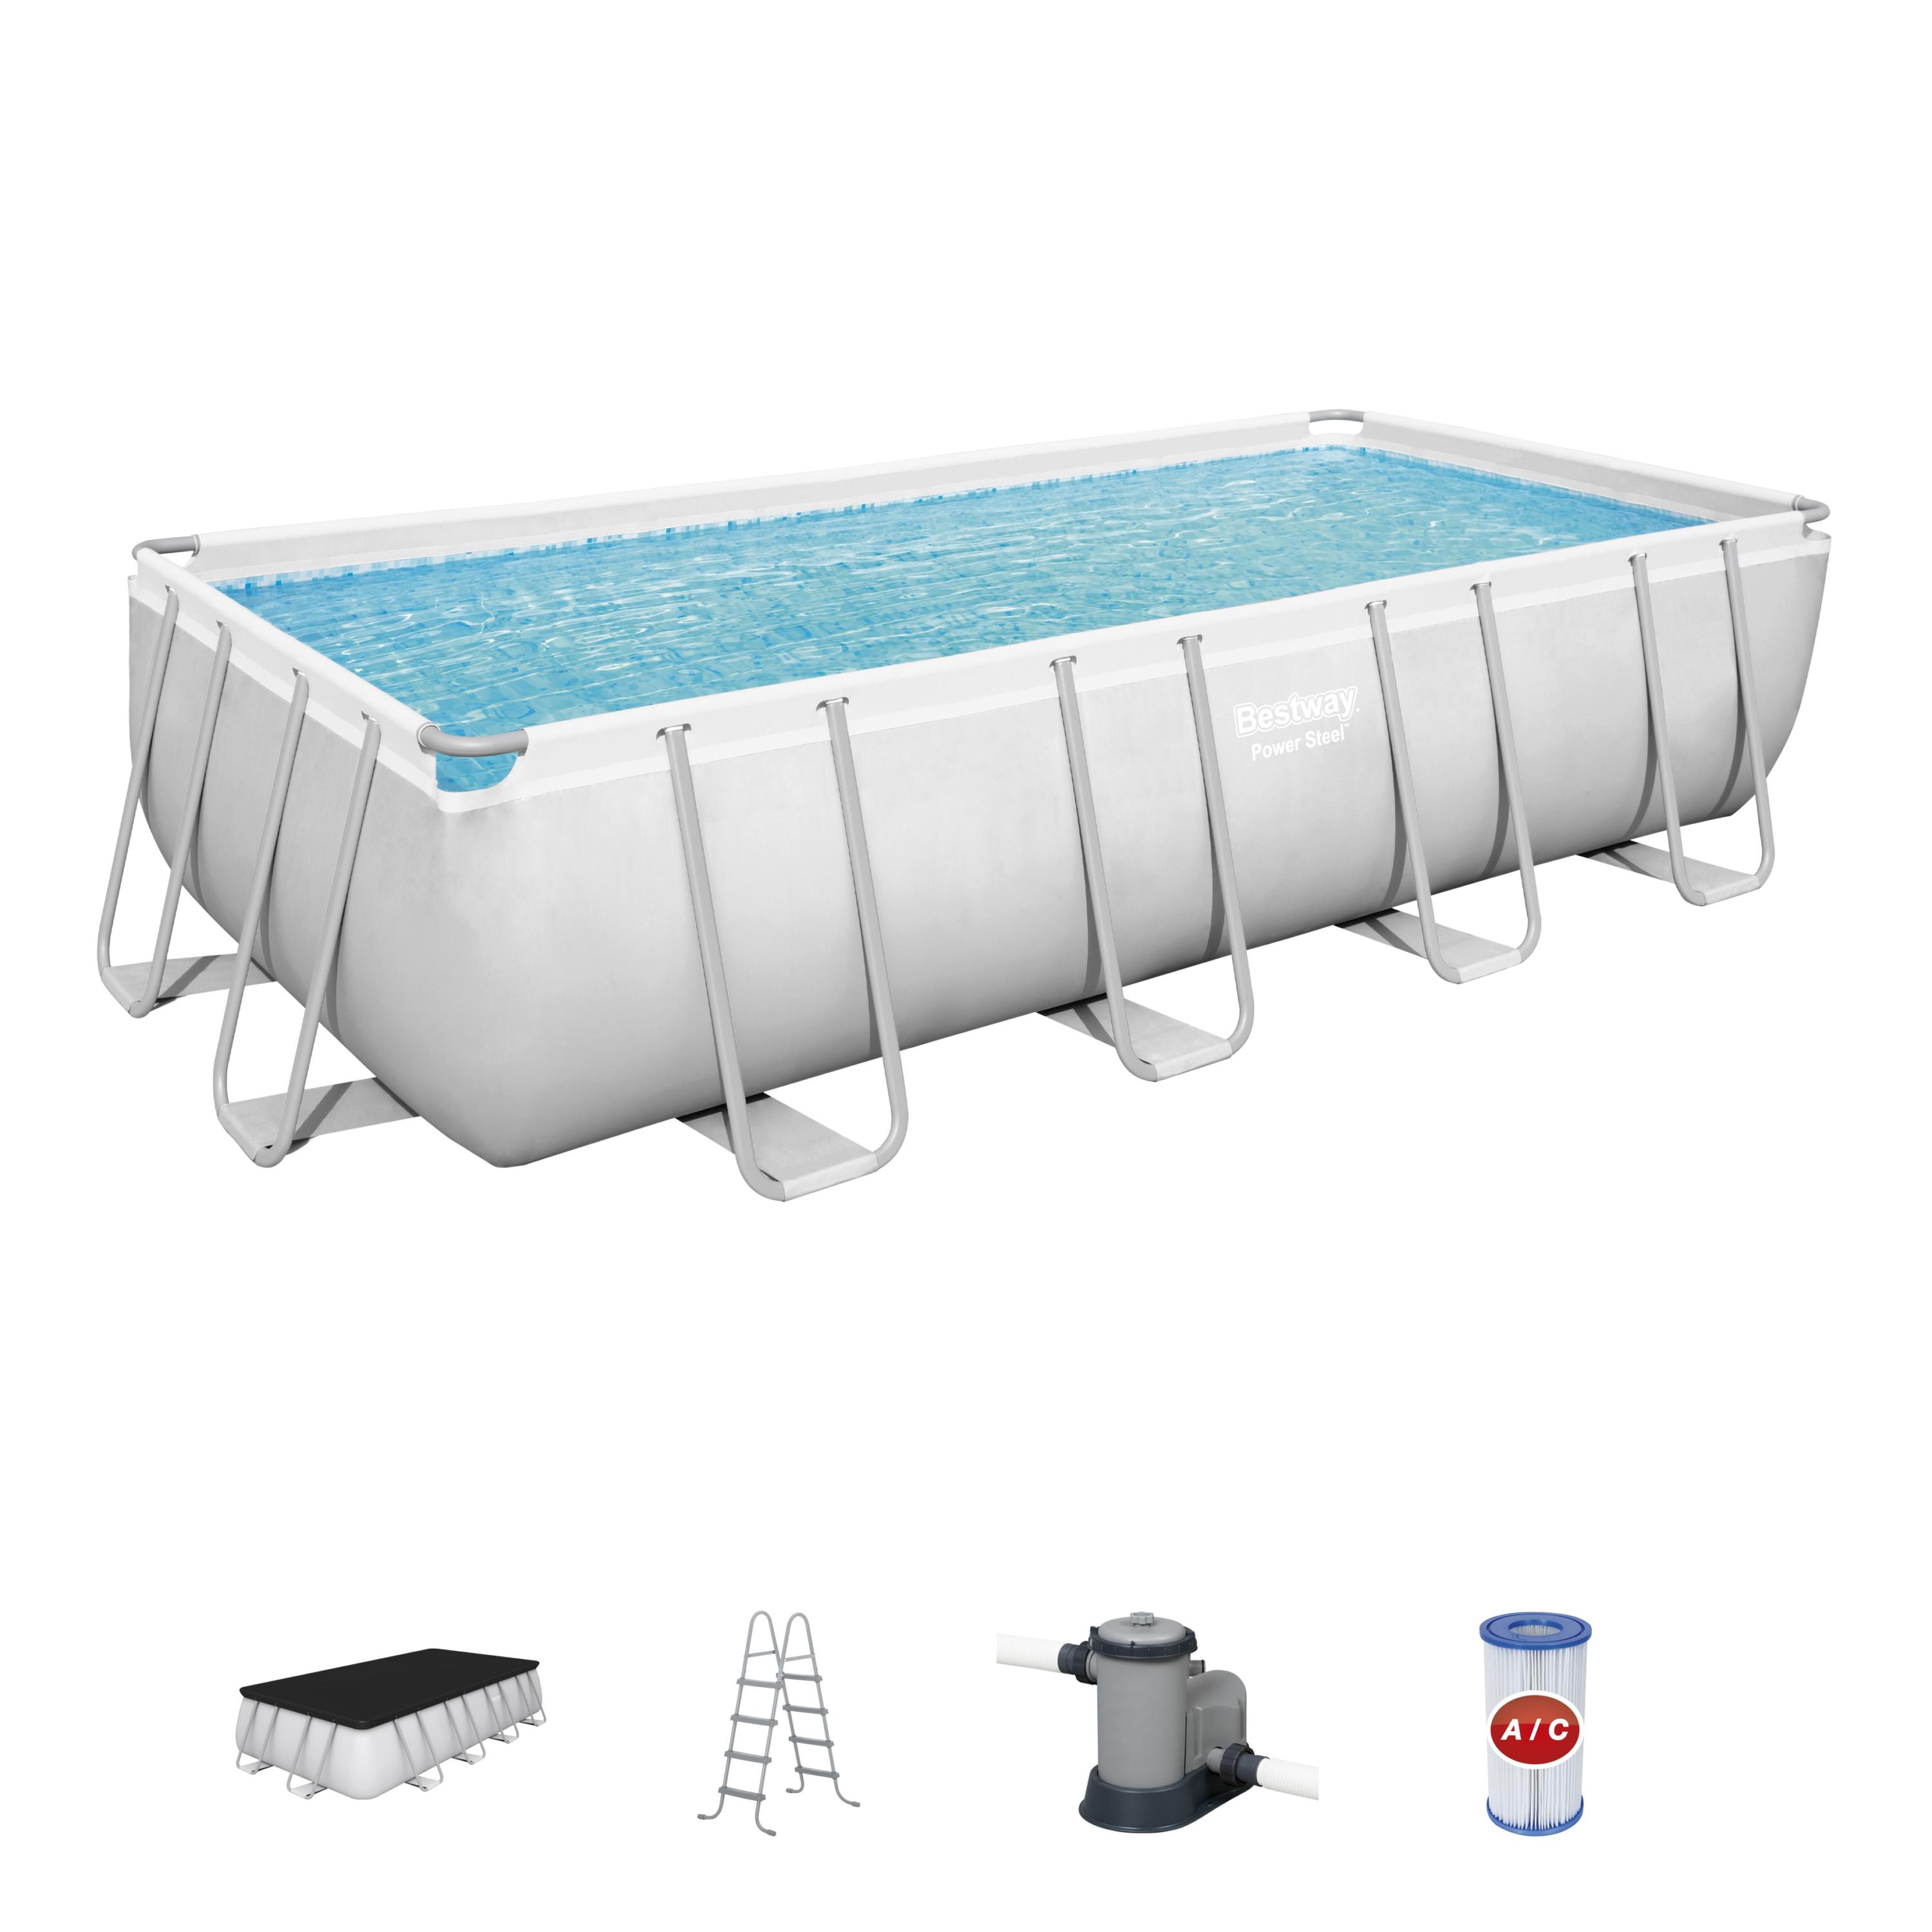 Bestway Power Steel 18' x 9' x 48" Rectangular Metal Frame Swimming Pool Set with Pump, Ladder and Cover - image 4 of 8